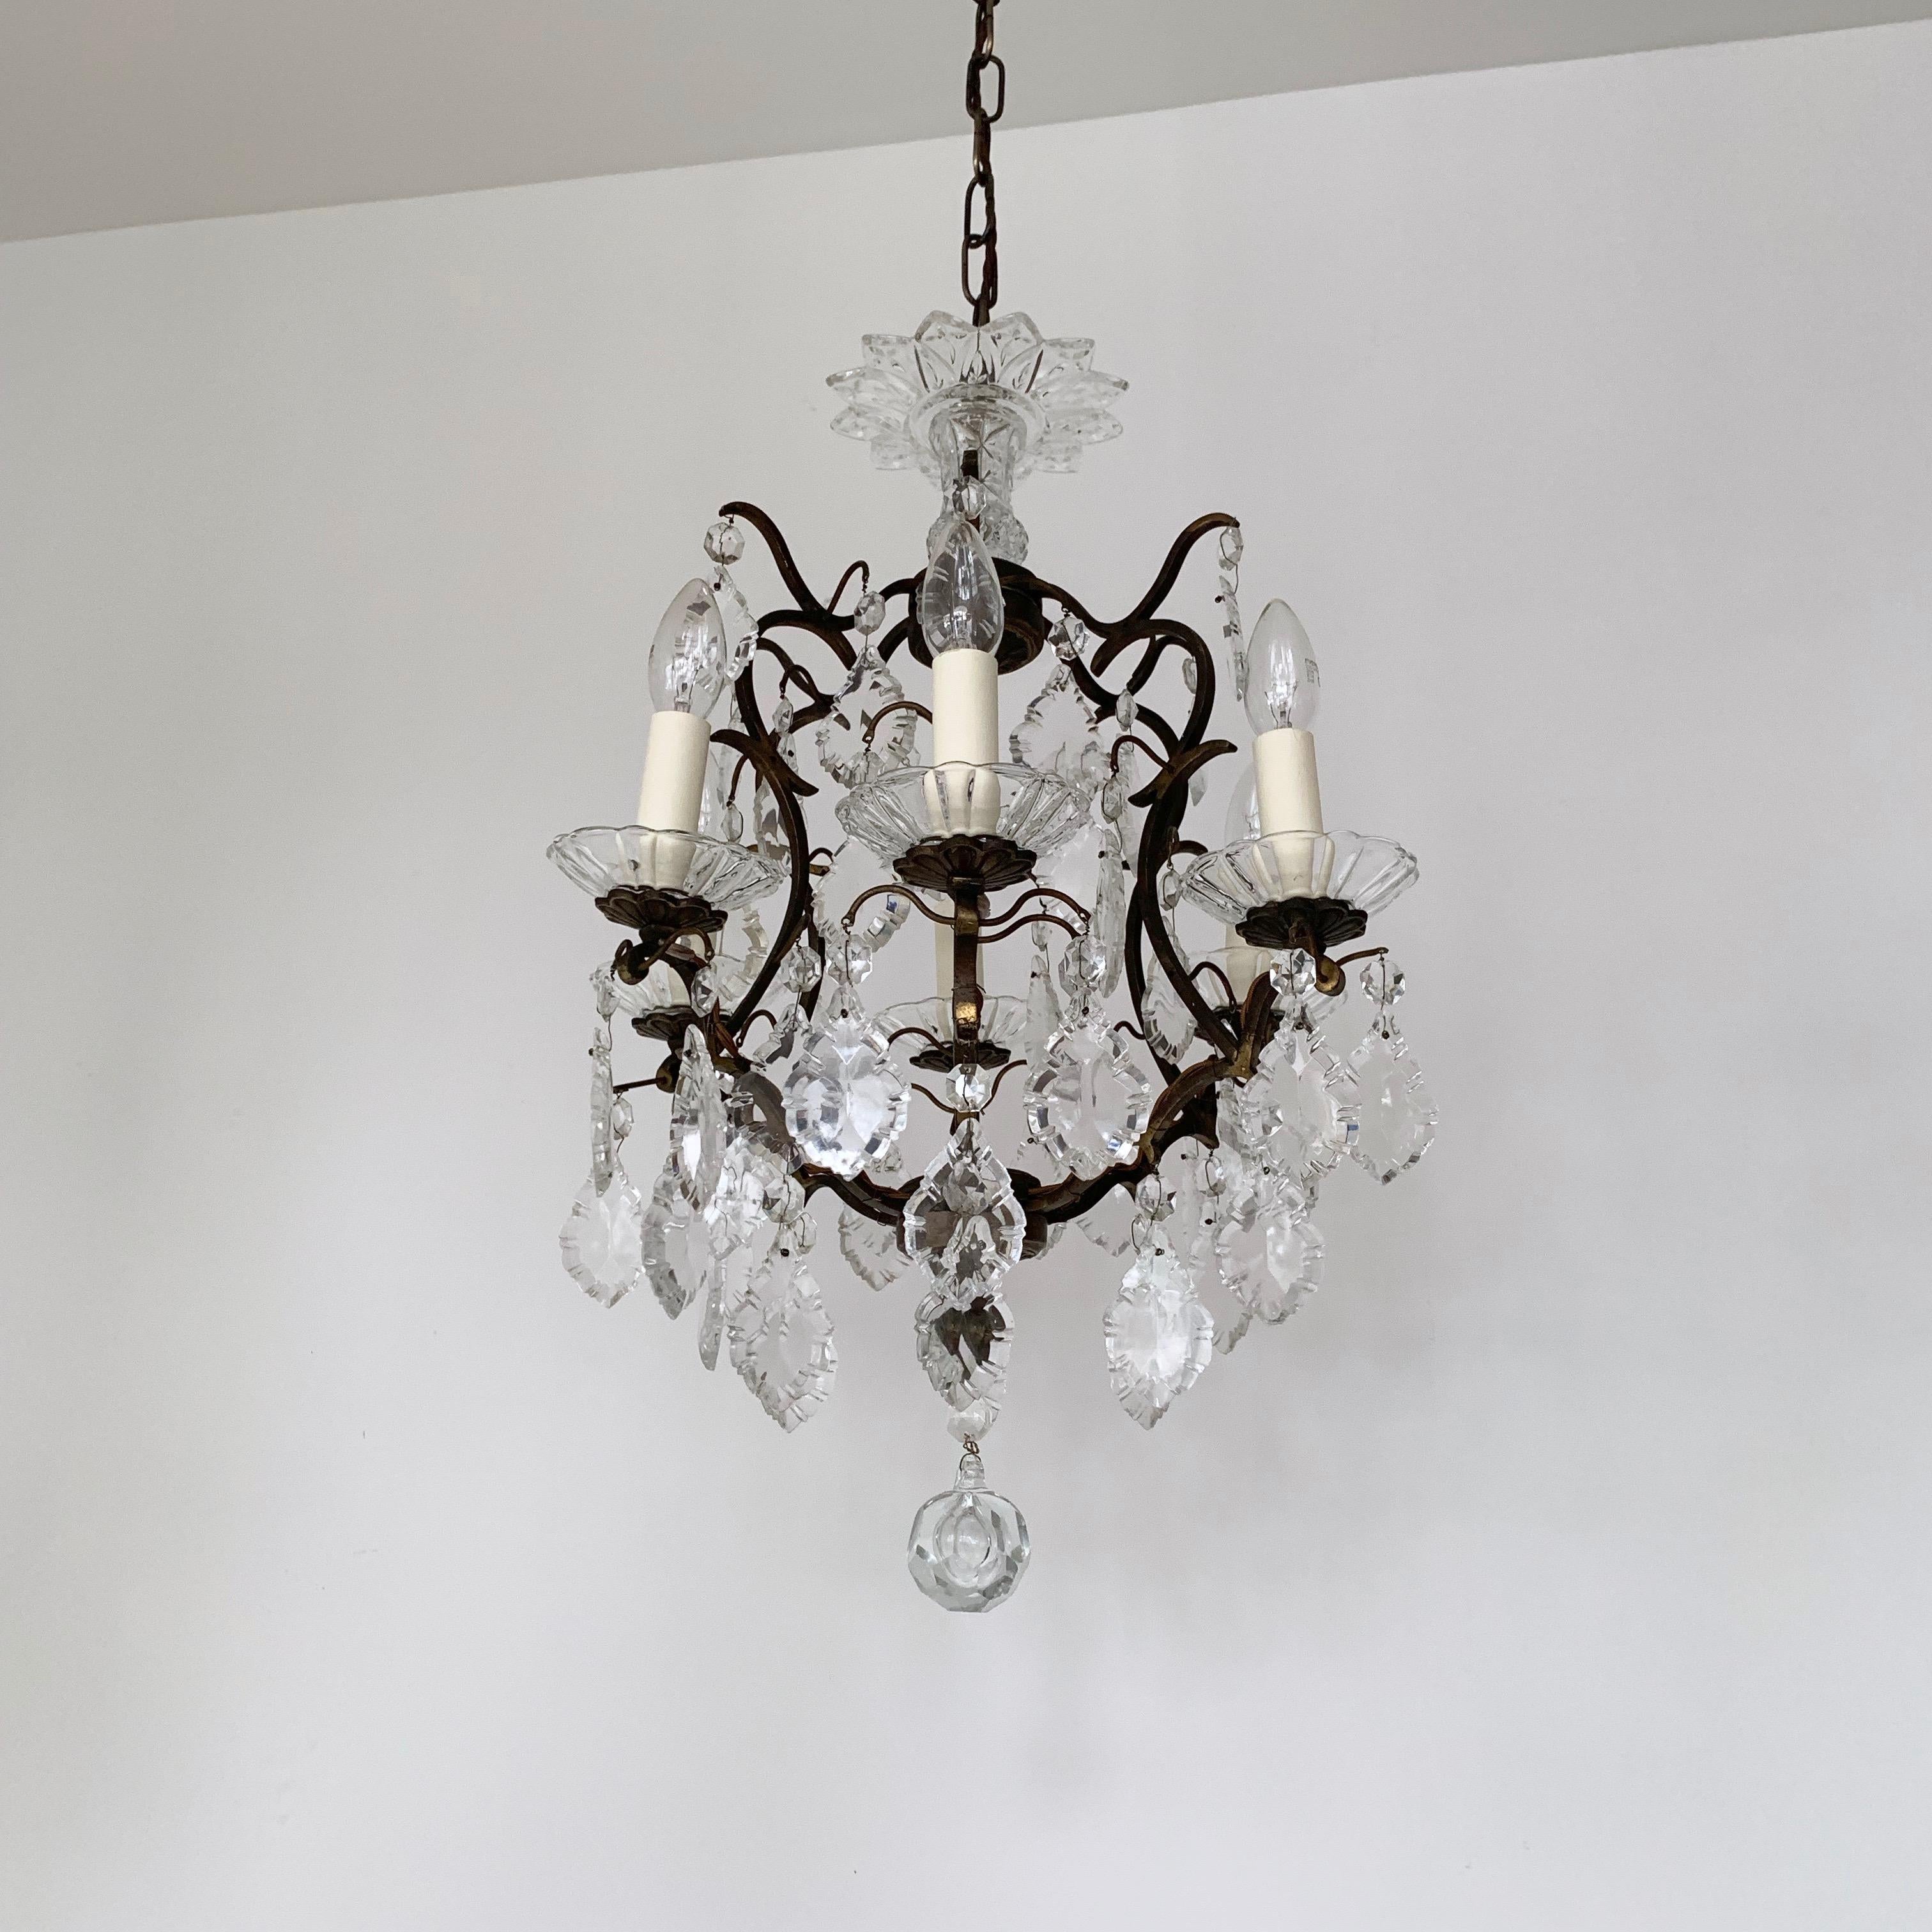 Italian Birdcage Chandelier with Glass Details For Sale 2